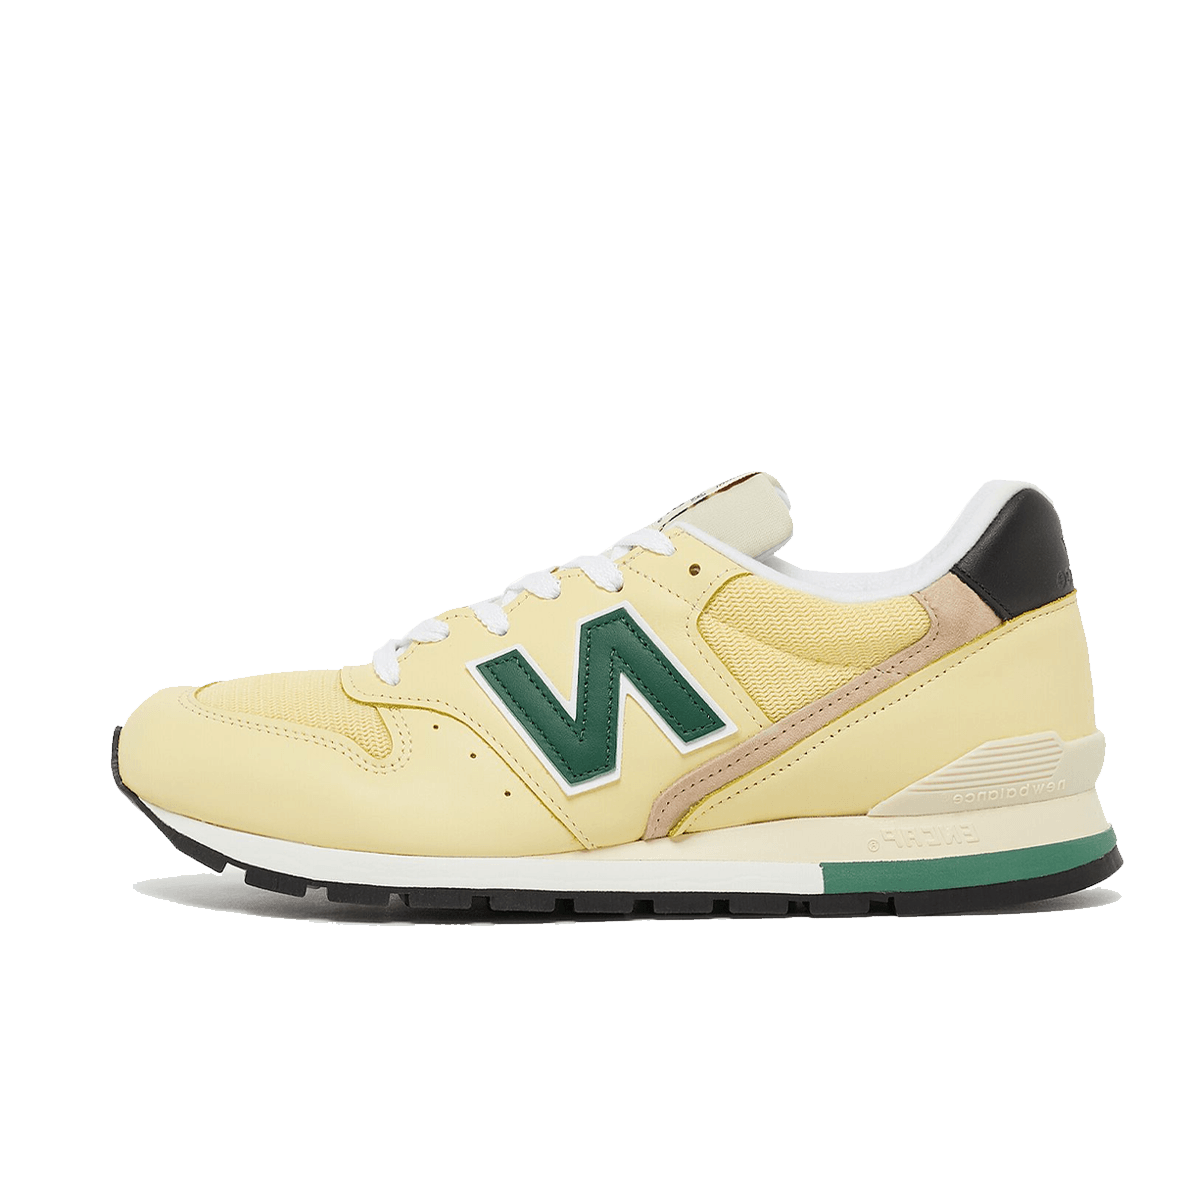 New Balance 996 'Pale Yellow' - Made in USA